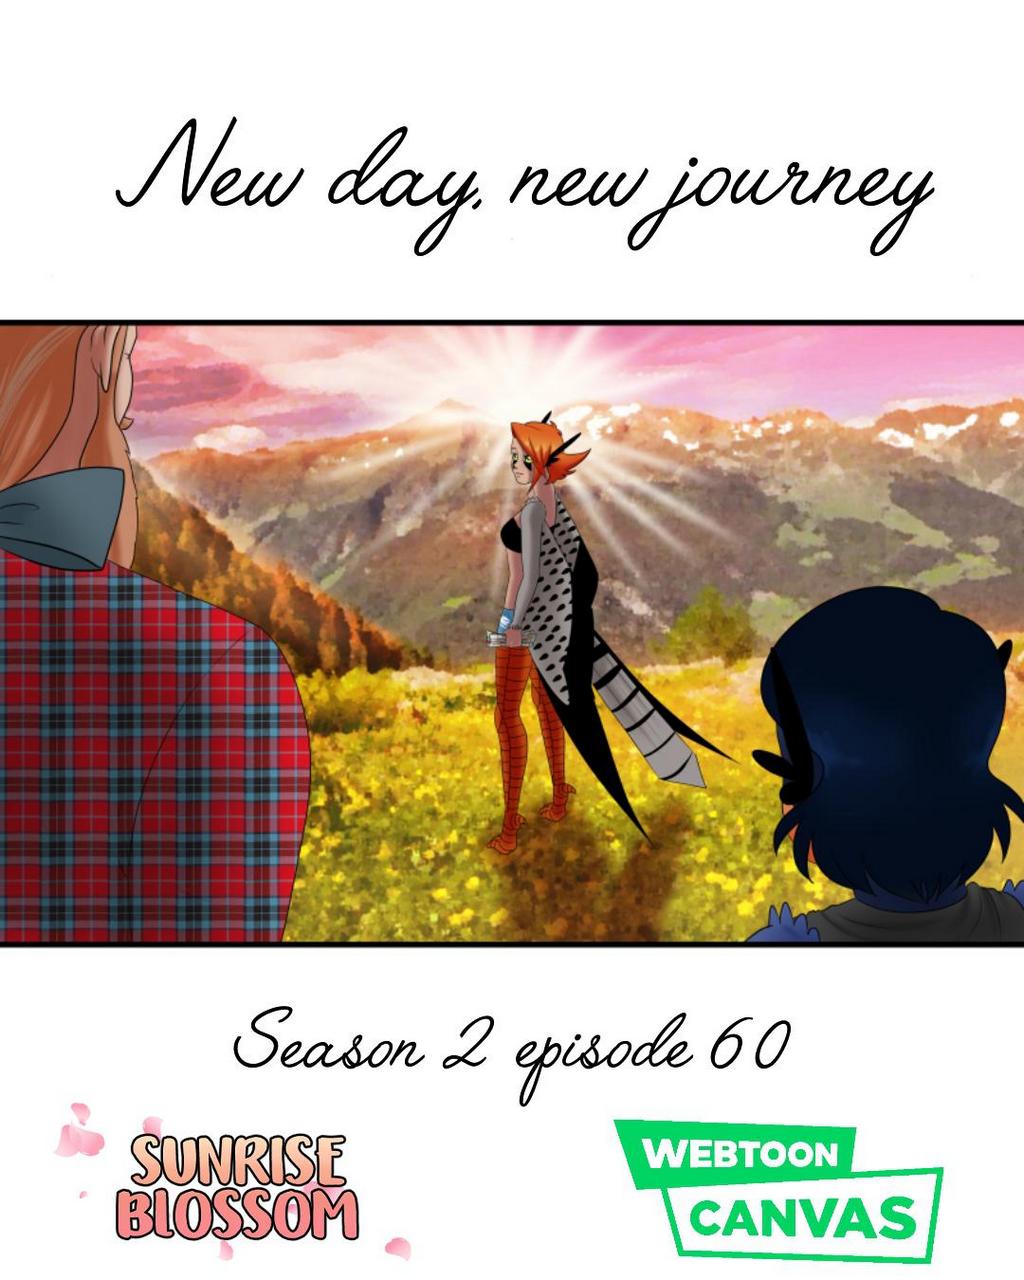 Time For My Mc To Finally Be Reunited With Her Beloved Sunrise Blossom On Webtoo